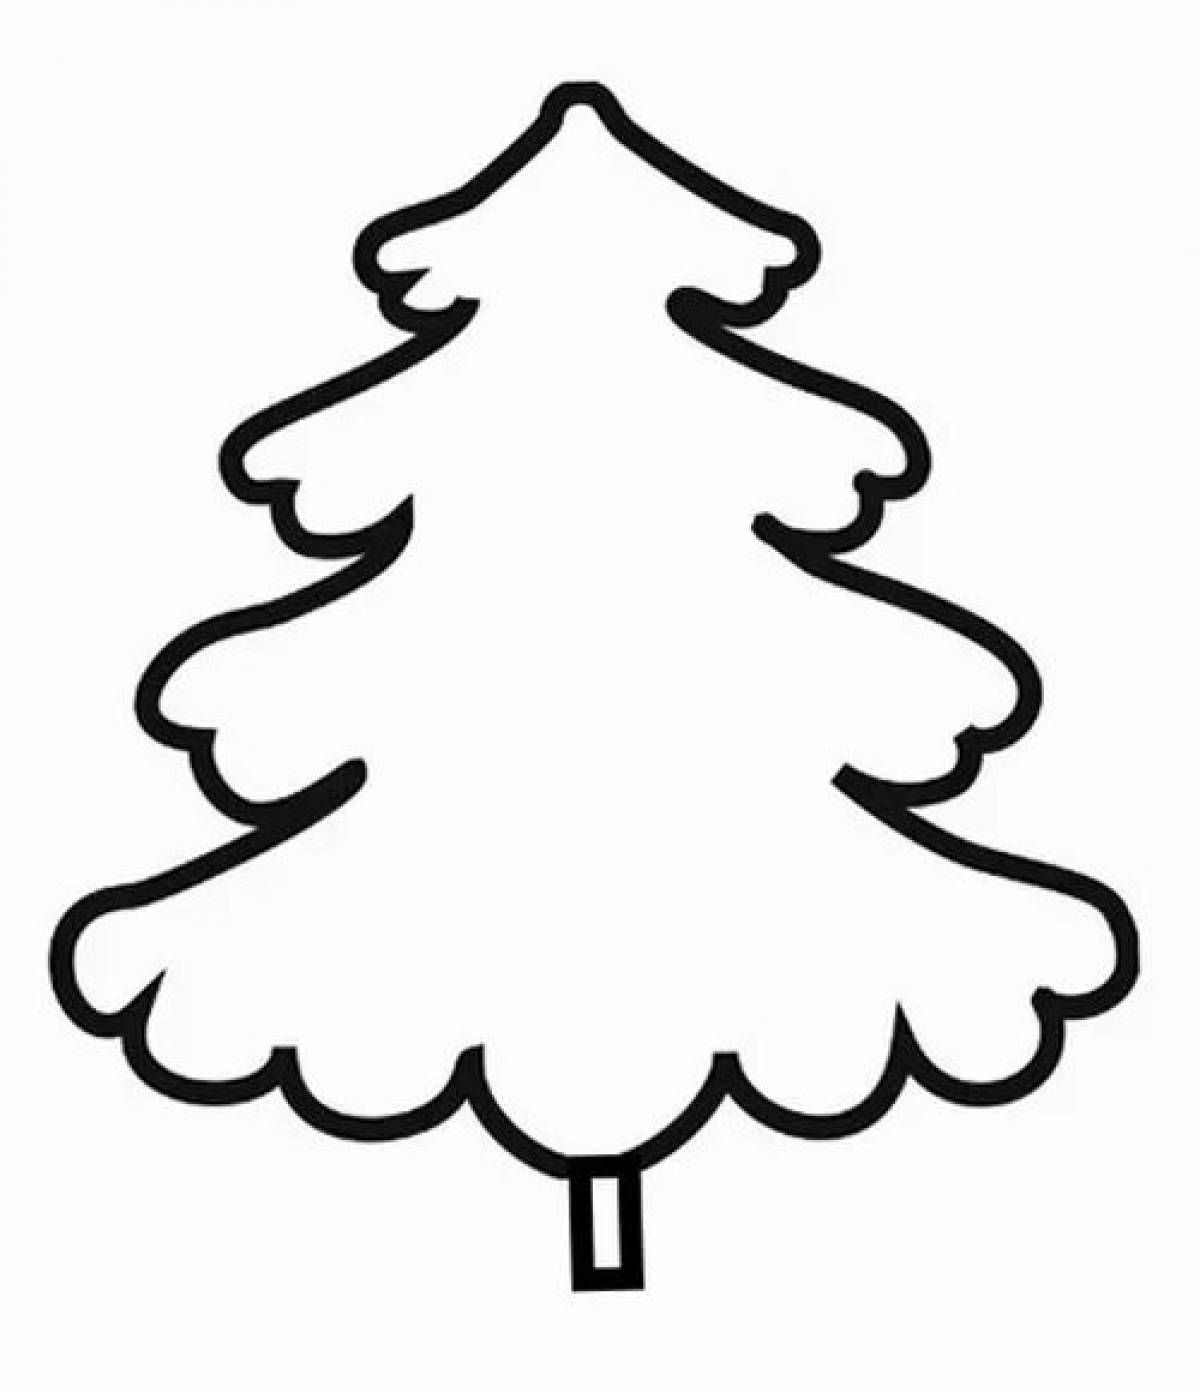 Playtime christmas tree coloring page